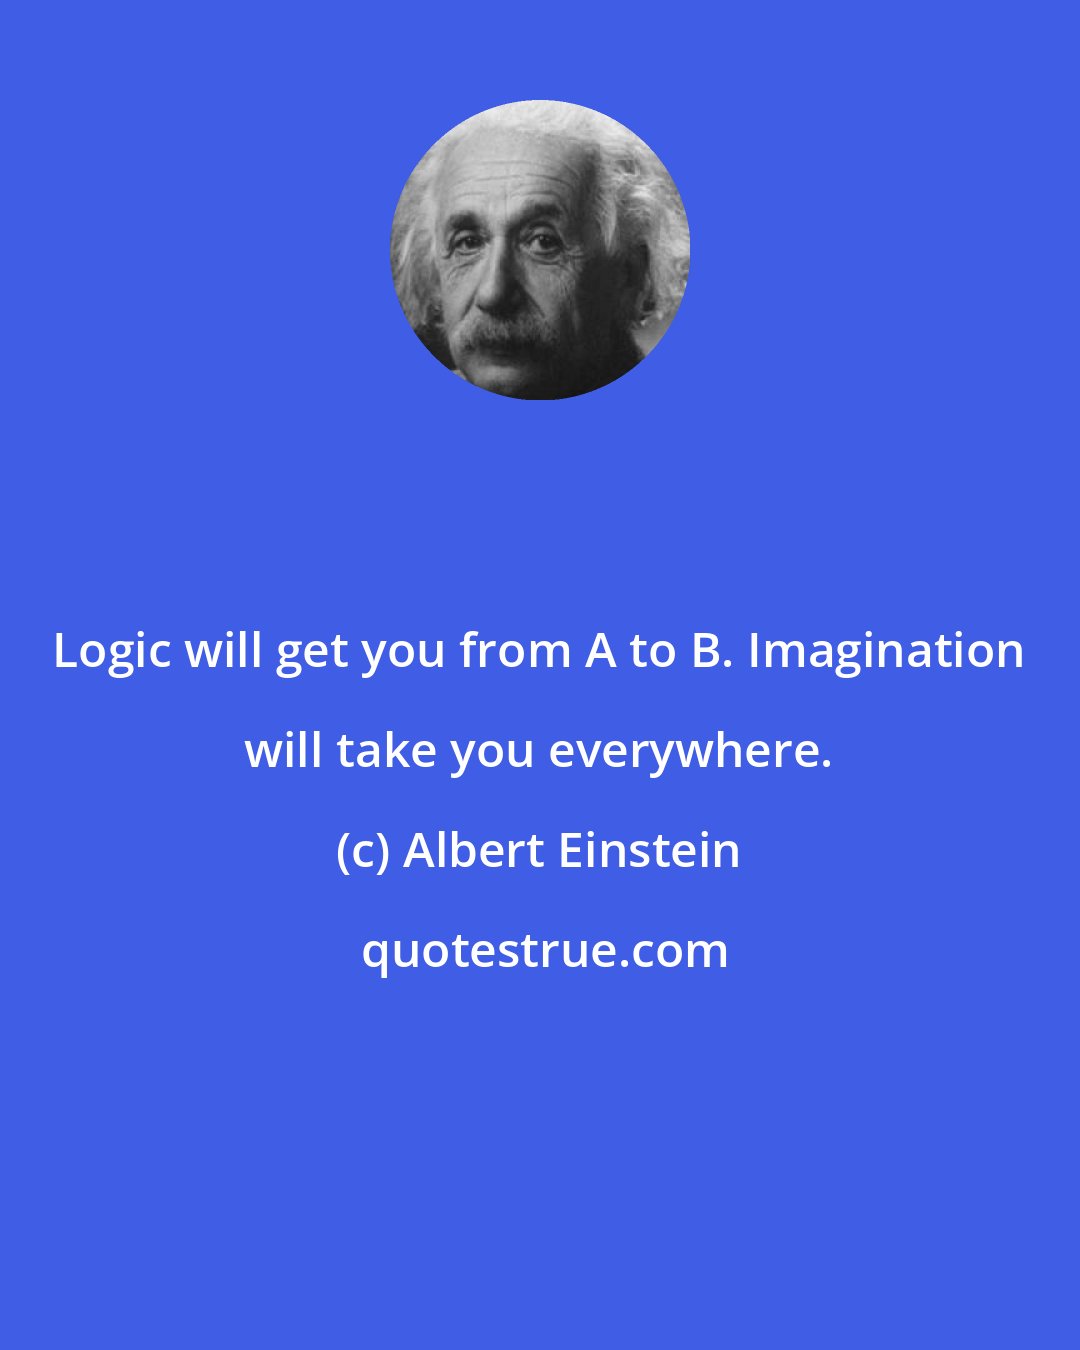 Albert Einstein: Logic will get you from A to B. Imagination will take you everywhere.